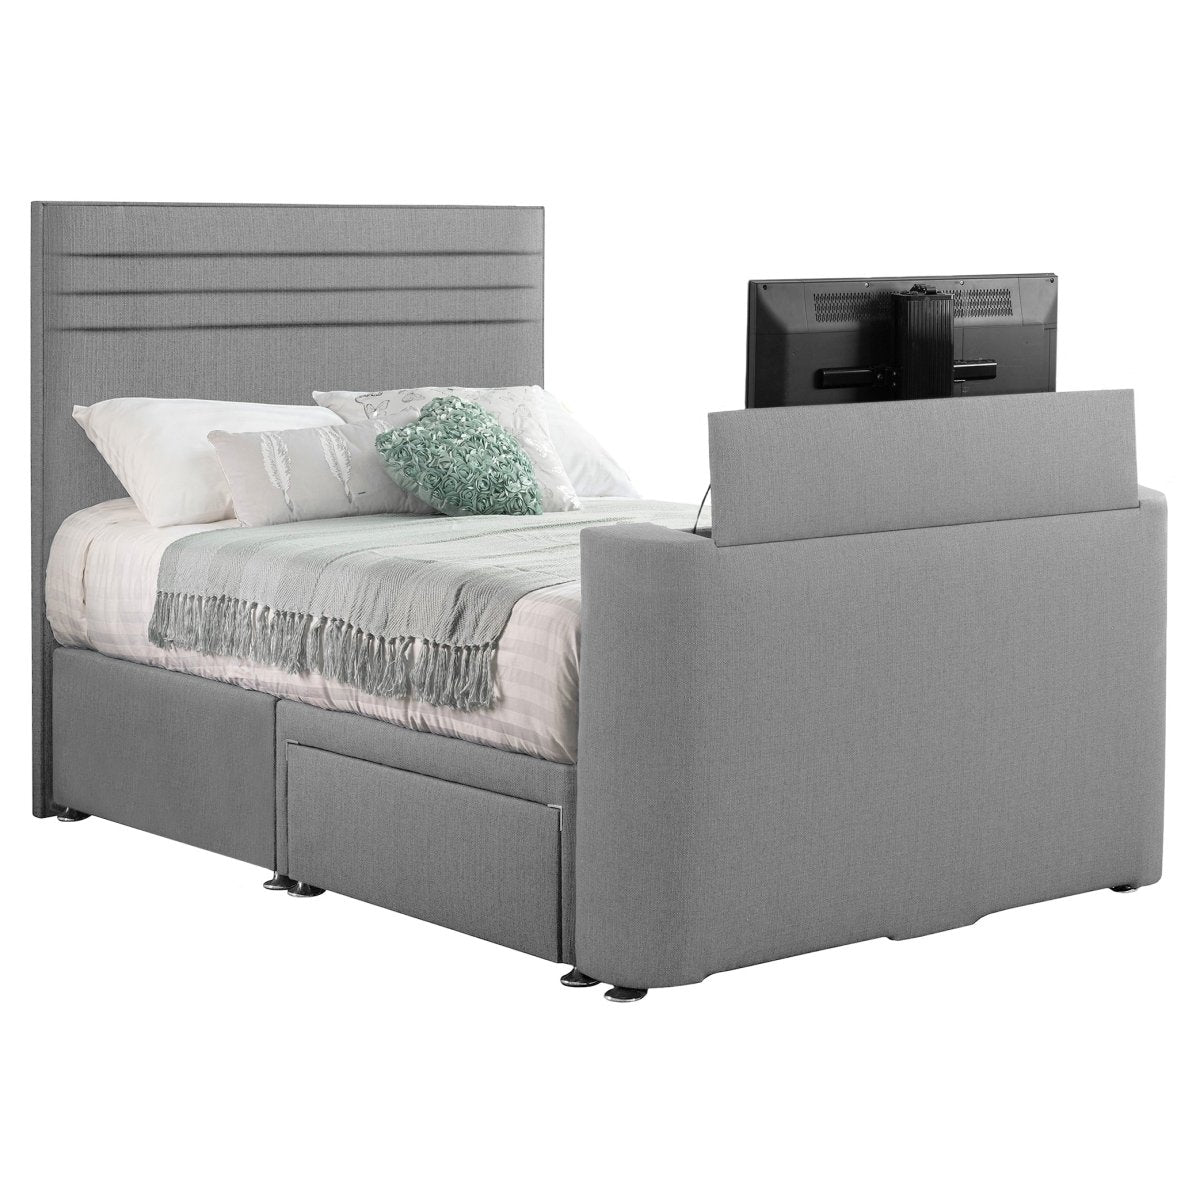 Sweet Dreams Image Chic TV Bed with Storage Options - TV Beds Northwest - INIMA-CHI135PT4DCHATS OYSTER - choose your colour tvbed - doubletvbed